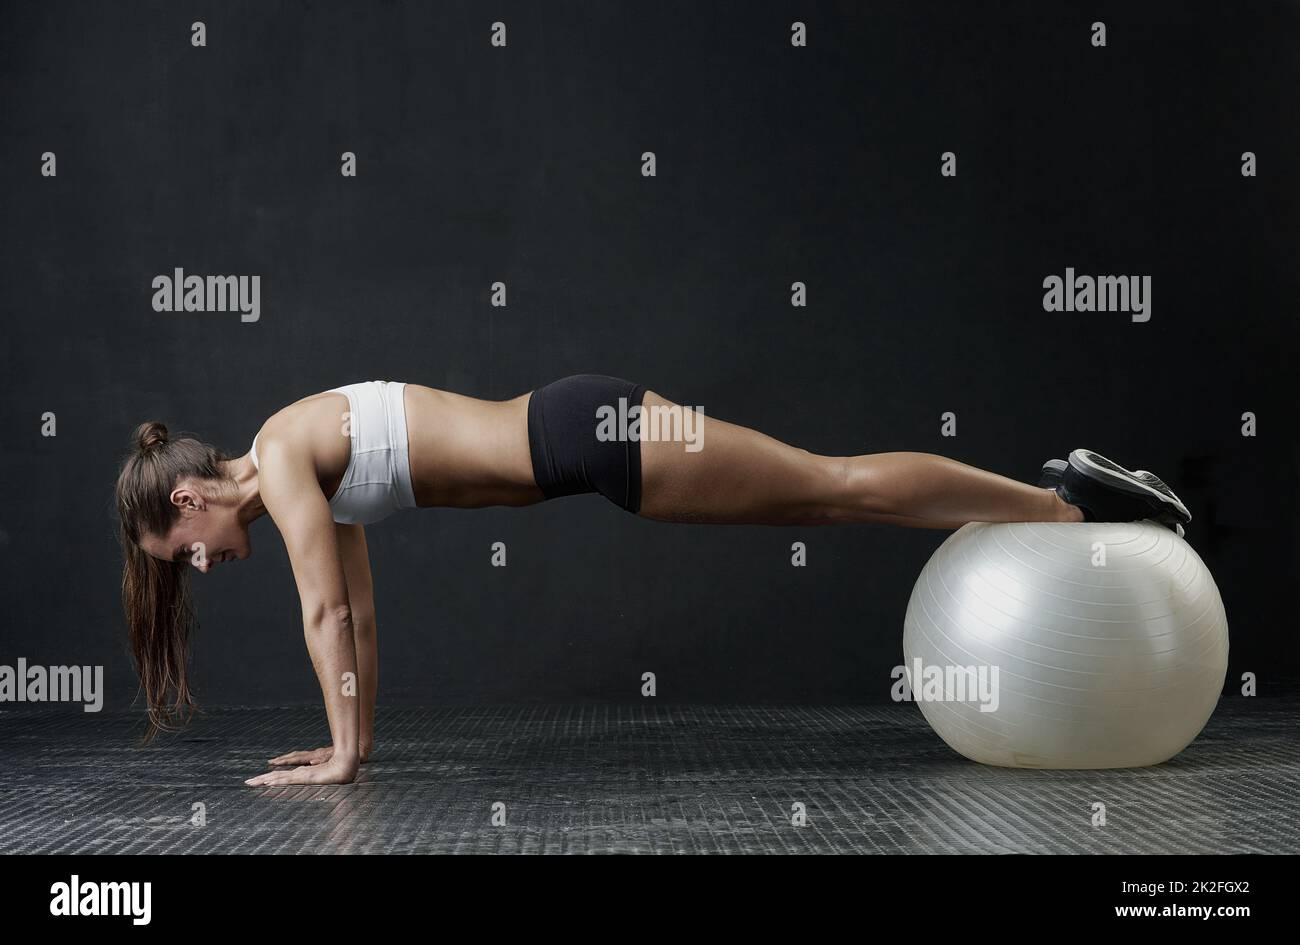 Get on her level. Studio shot of an attractive young woman working out against a dark background. Stock Photo